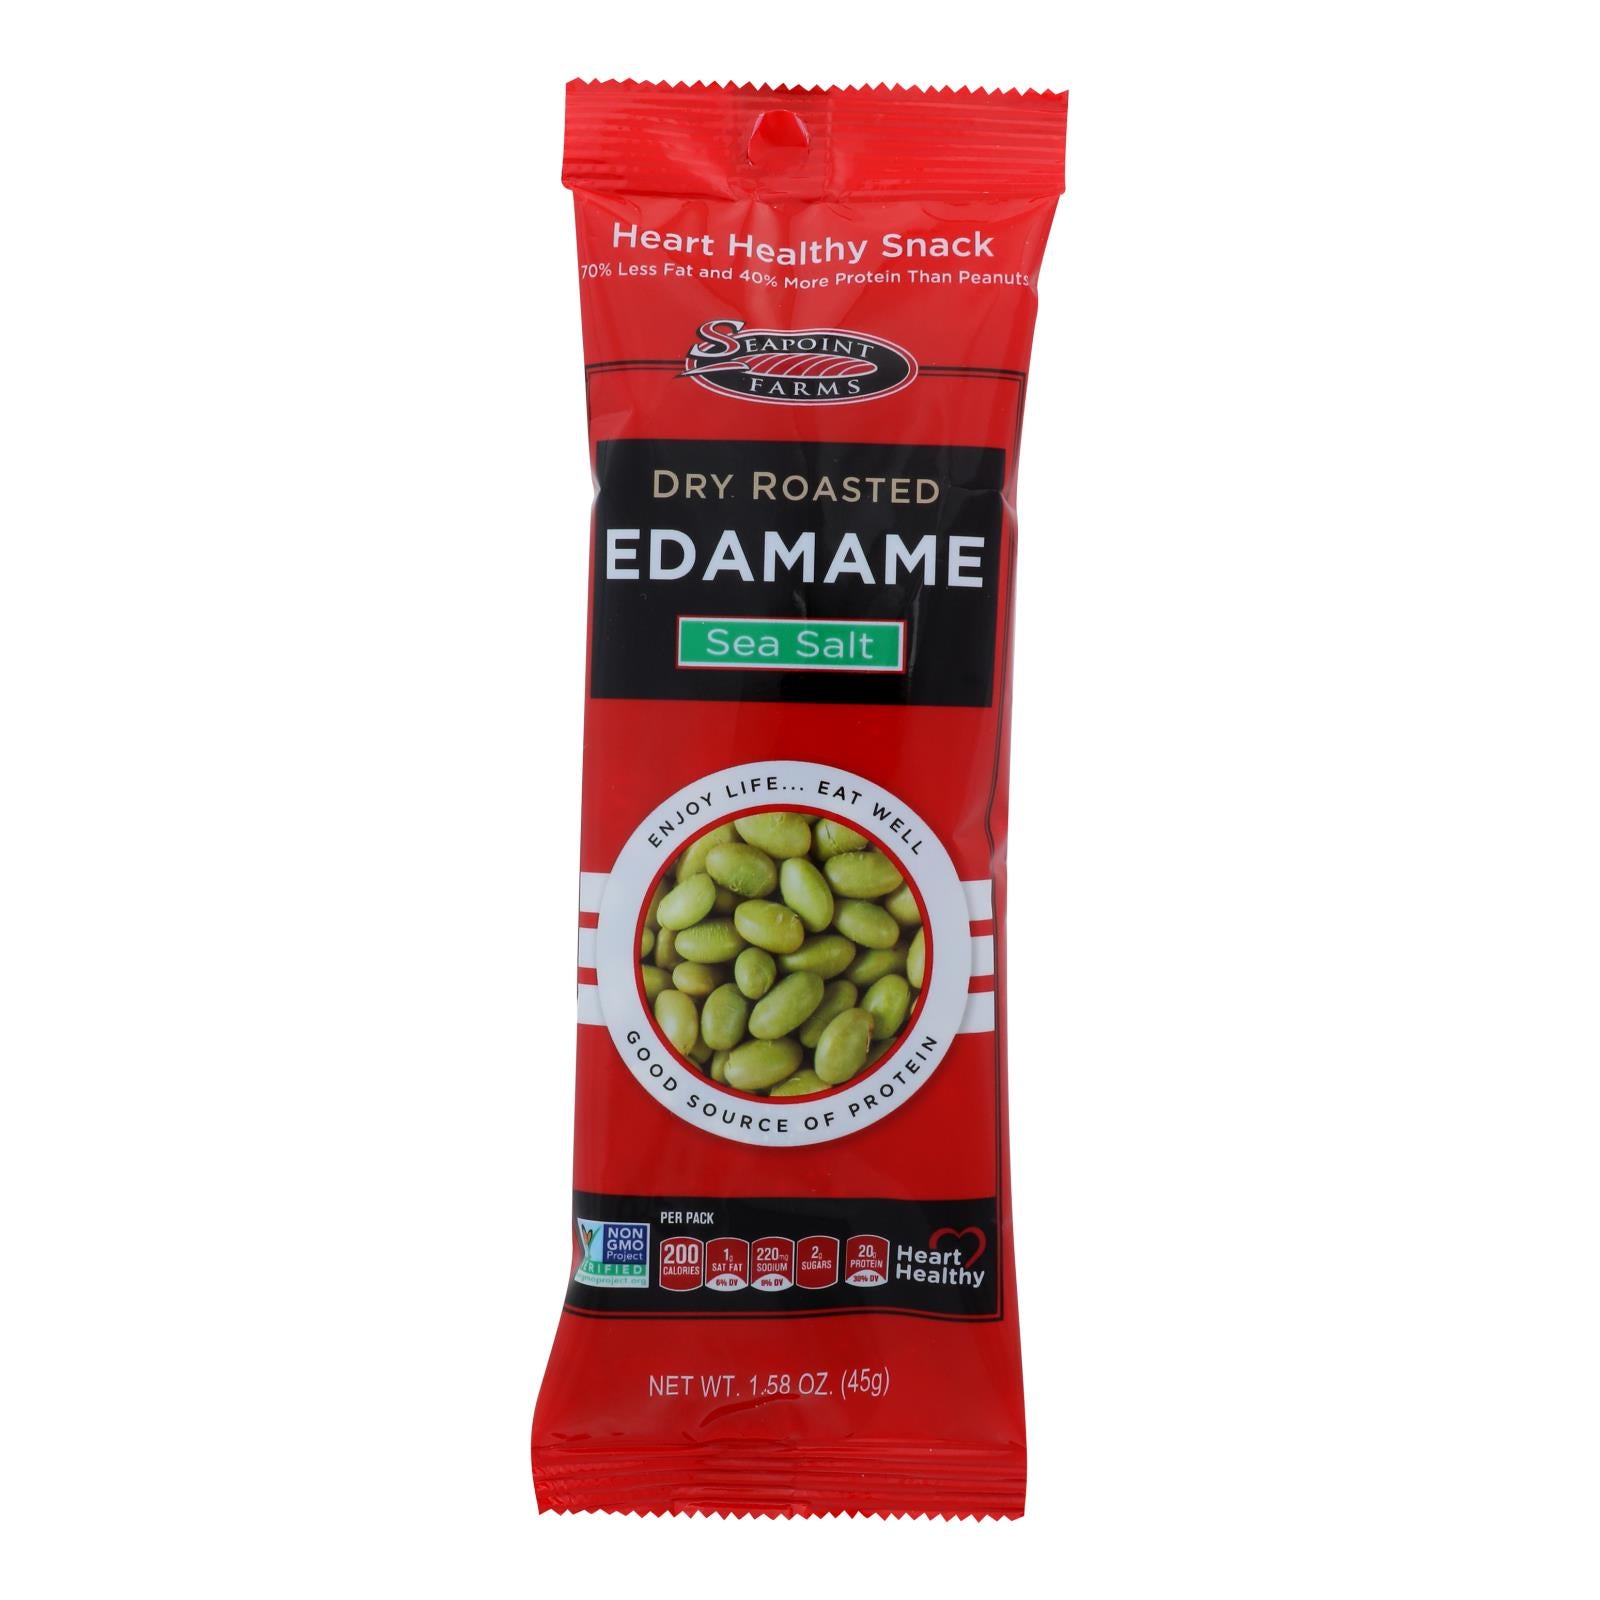 Seapoint Farms Edamame - Dry Roasted - Lightly Salted - 1.58 Oz - Case Of 12